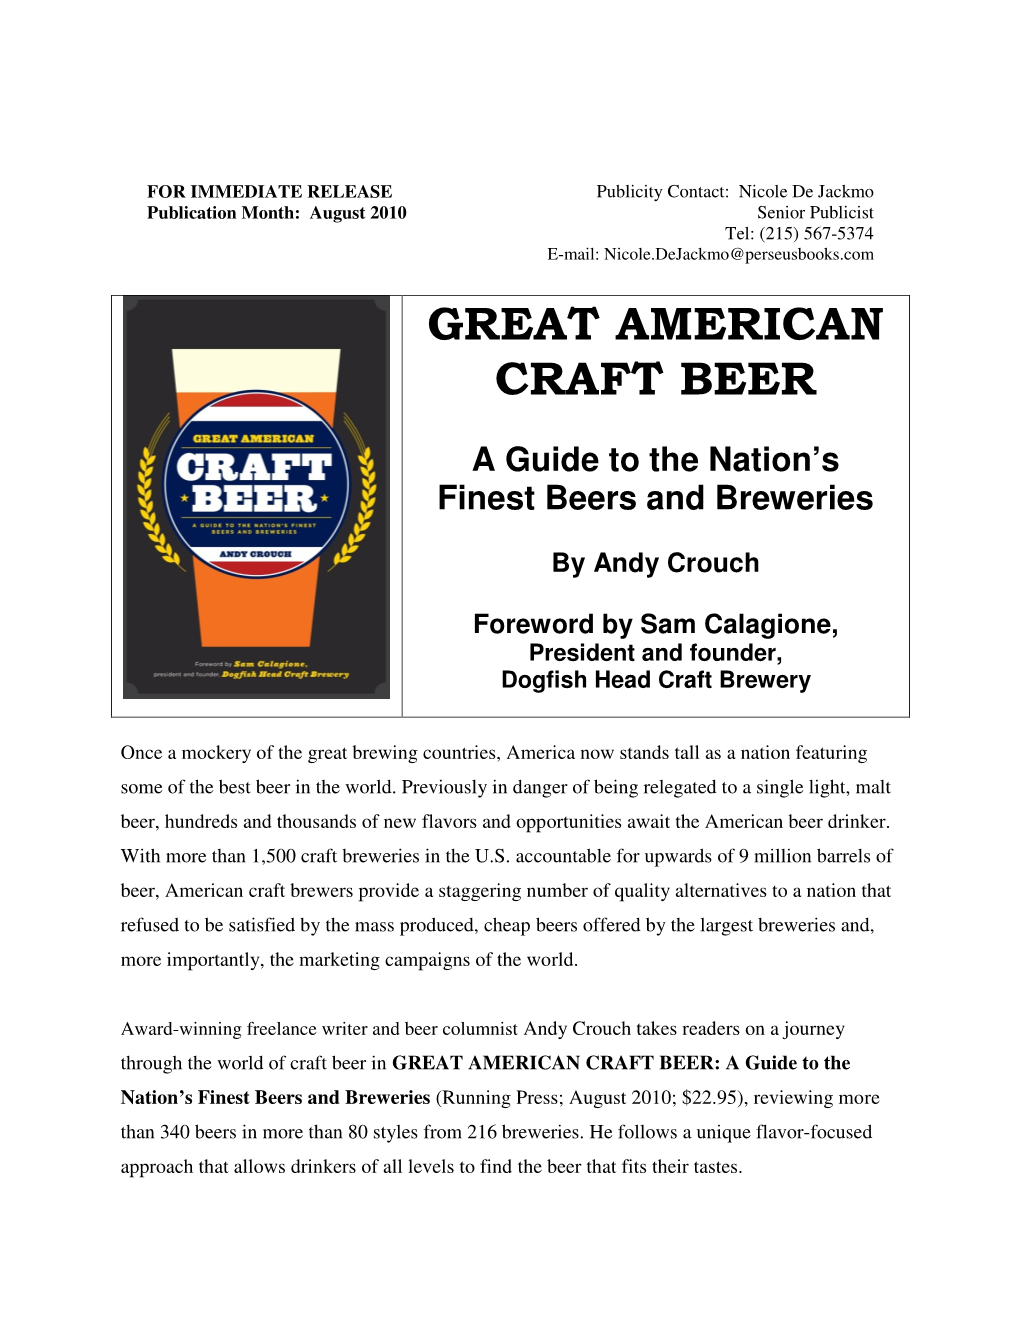 Press Release for Great American Craft Beer